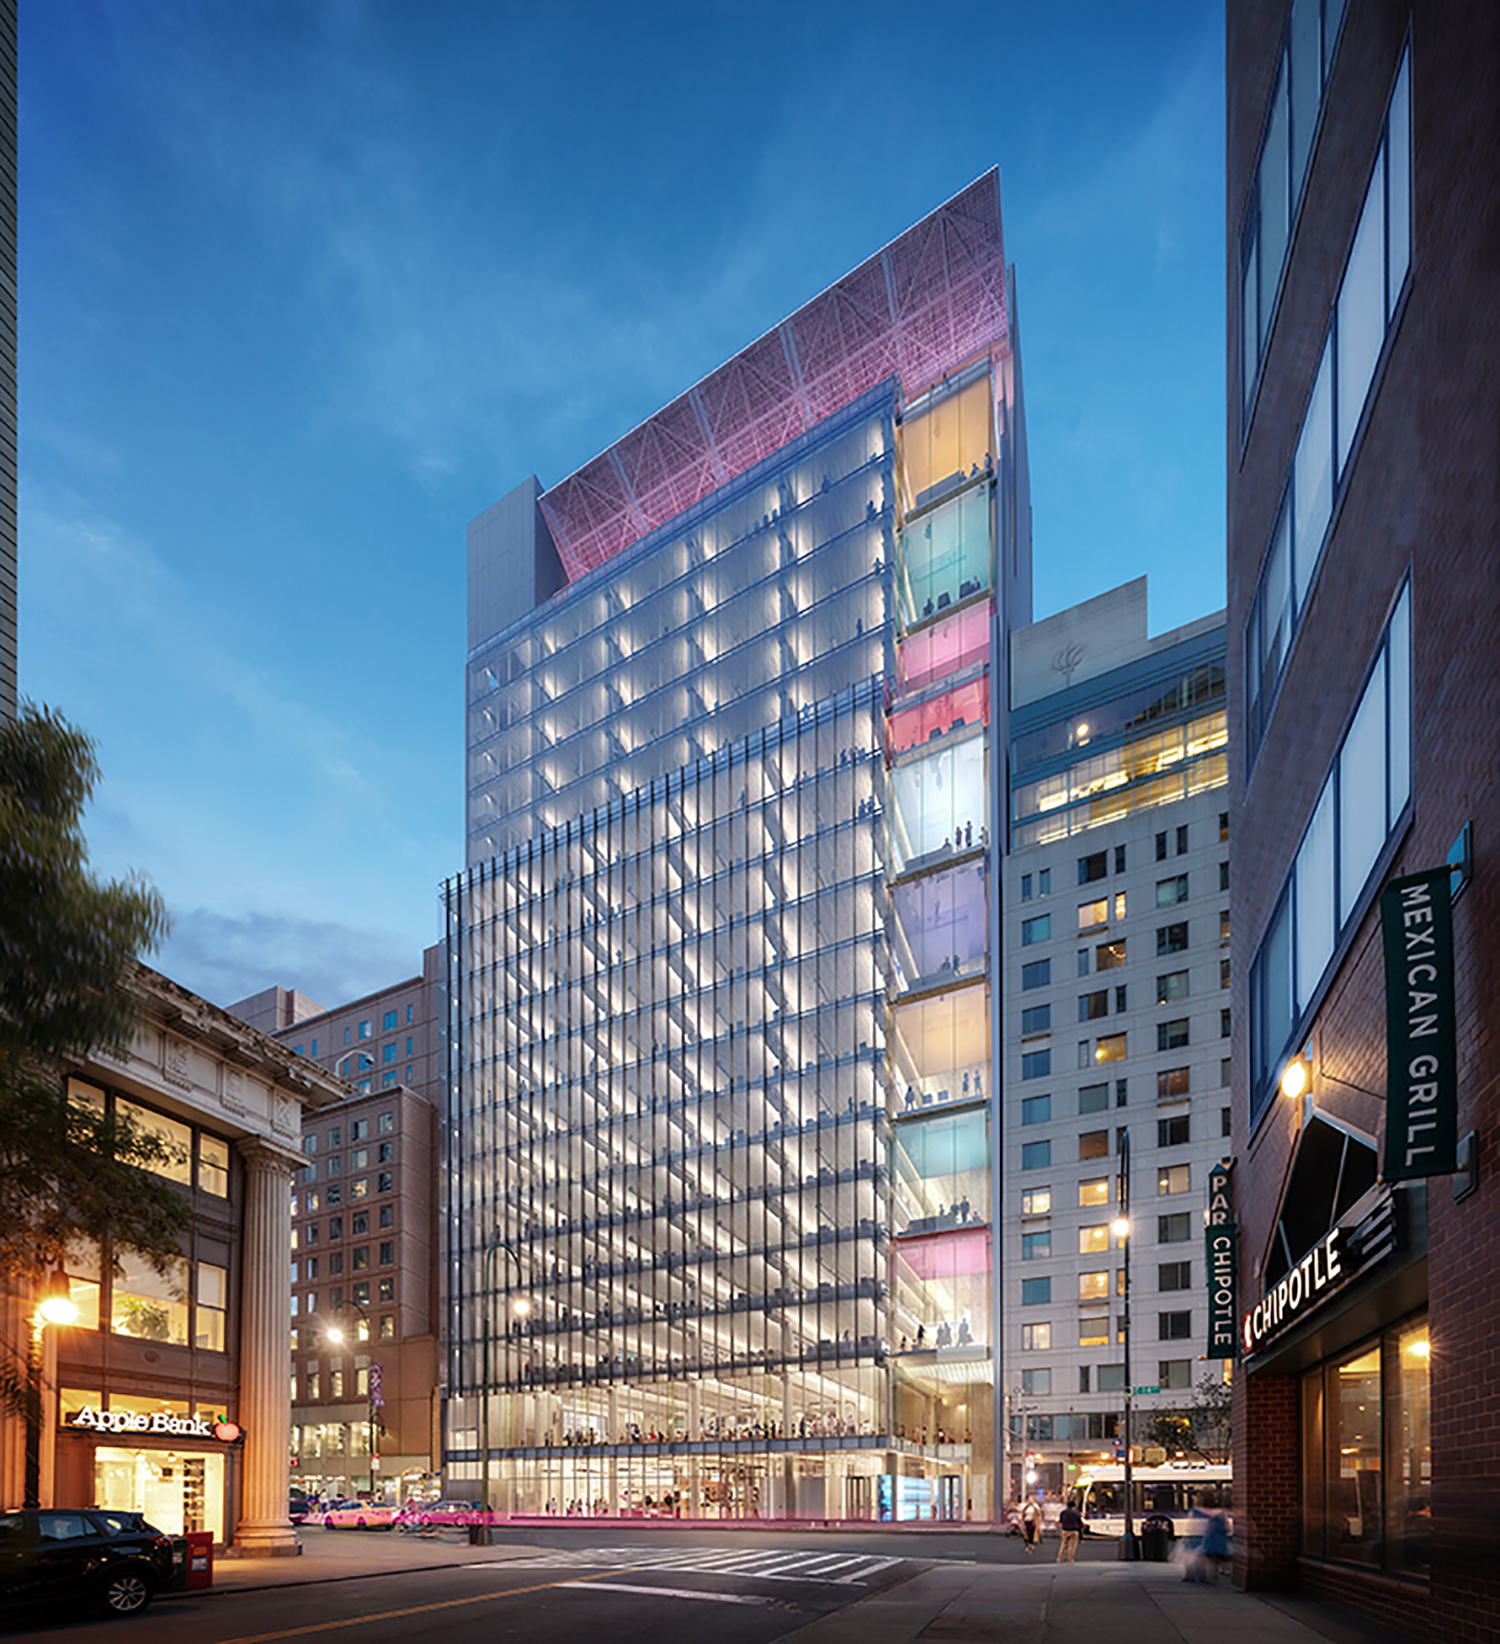 Construction Begins On Union Square Tech Training Center At 124 East 14th Street - New York Yimby